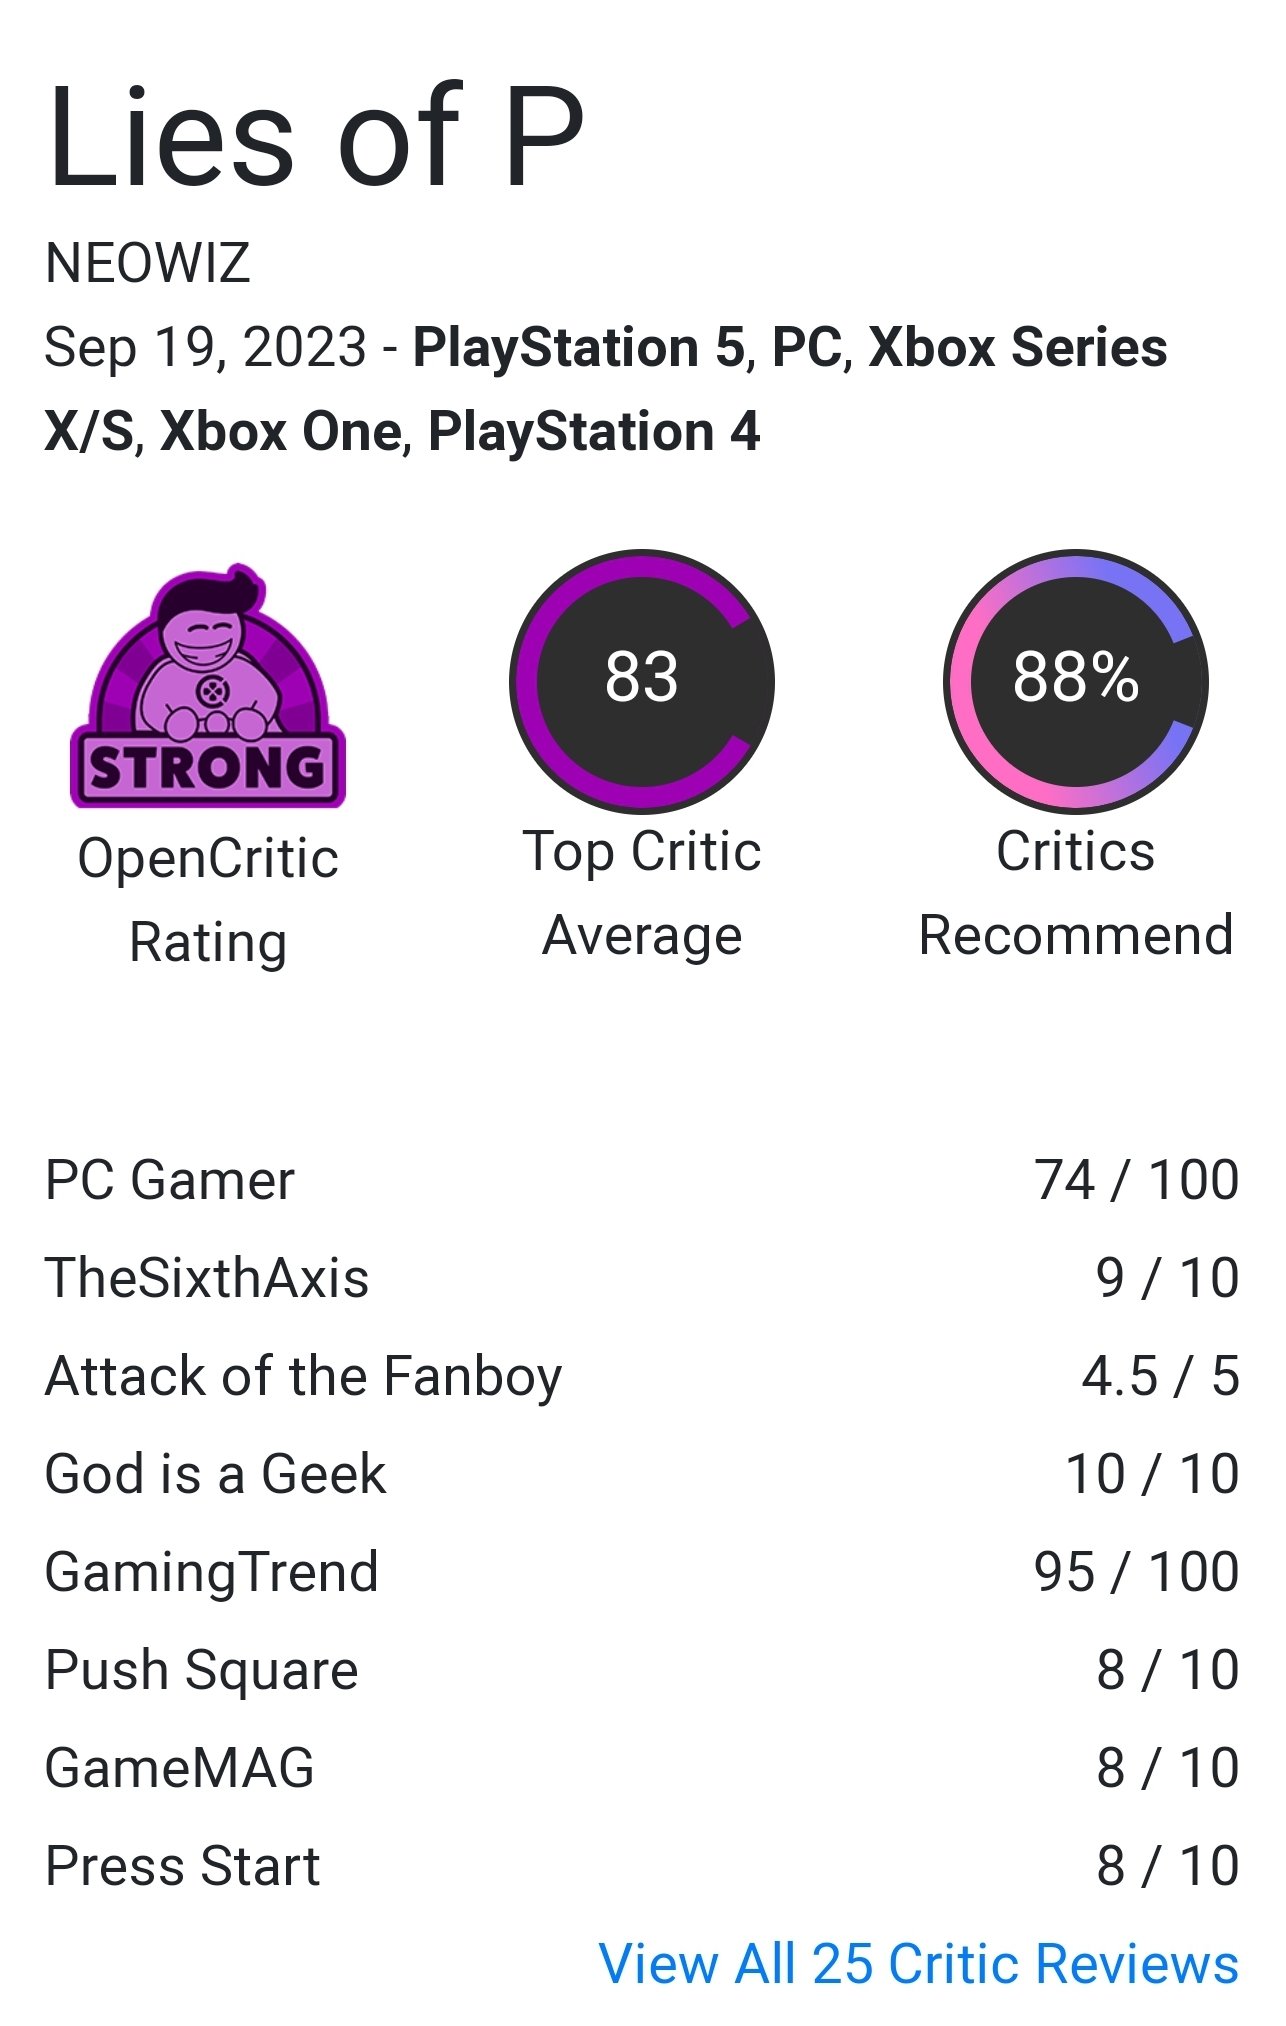 Knoebel on X: Lies of P Reviews PCGamer 74 TheSixthAxis 9/10 Attack of the  Fanboy 4.5/5 God is a Geek 10/10 GamingTrend 95 Push Square 8/10 TechRaptor  7/10 Siliconera 7/10 Hey Poor